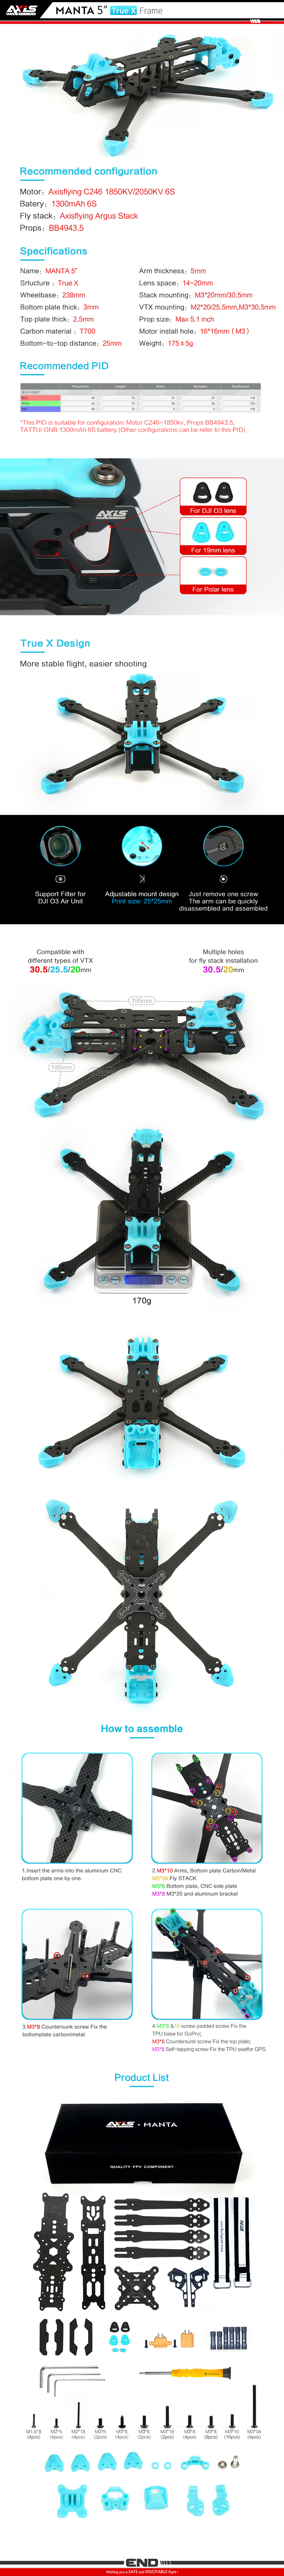 Axisflying MANTA5" / 5inch fpv freestyle Ture X frame kit  MANTA 5" frame kit cinematic drone,cinewhoop drone,longrange drone,freestyle drone,fpv drone,fpv quads,5inch freestyle drone,6inch freestyle drone,7inch longrange drone,5inch quads,6inch quads,7inch LR quads,7" fpv drone,7" fpv quads,7" longrange quads,6" cinematic quads,6" freestyle quads,6" longrange quads